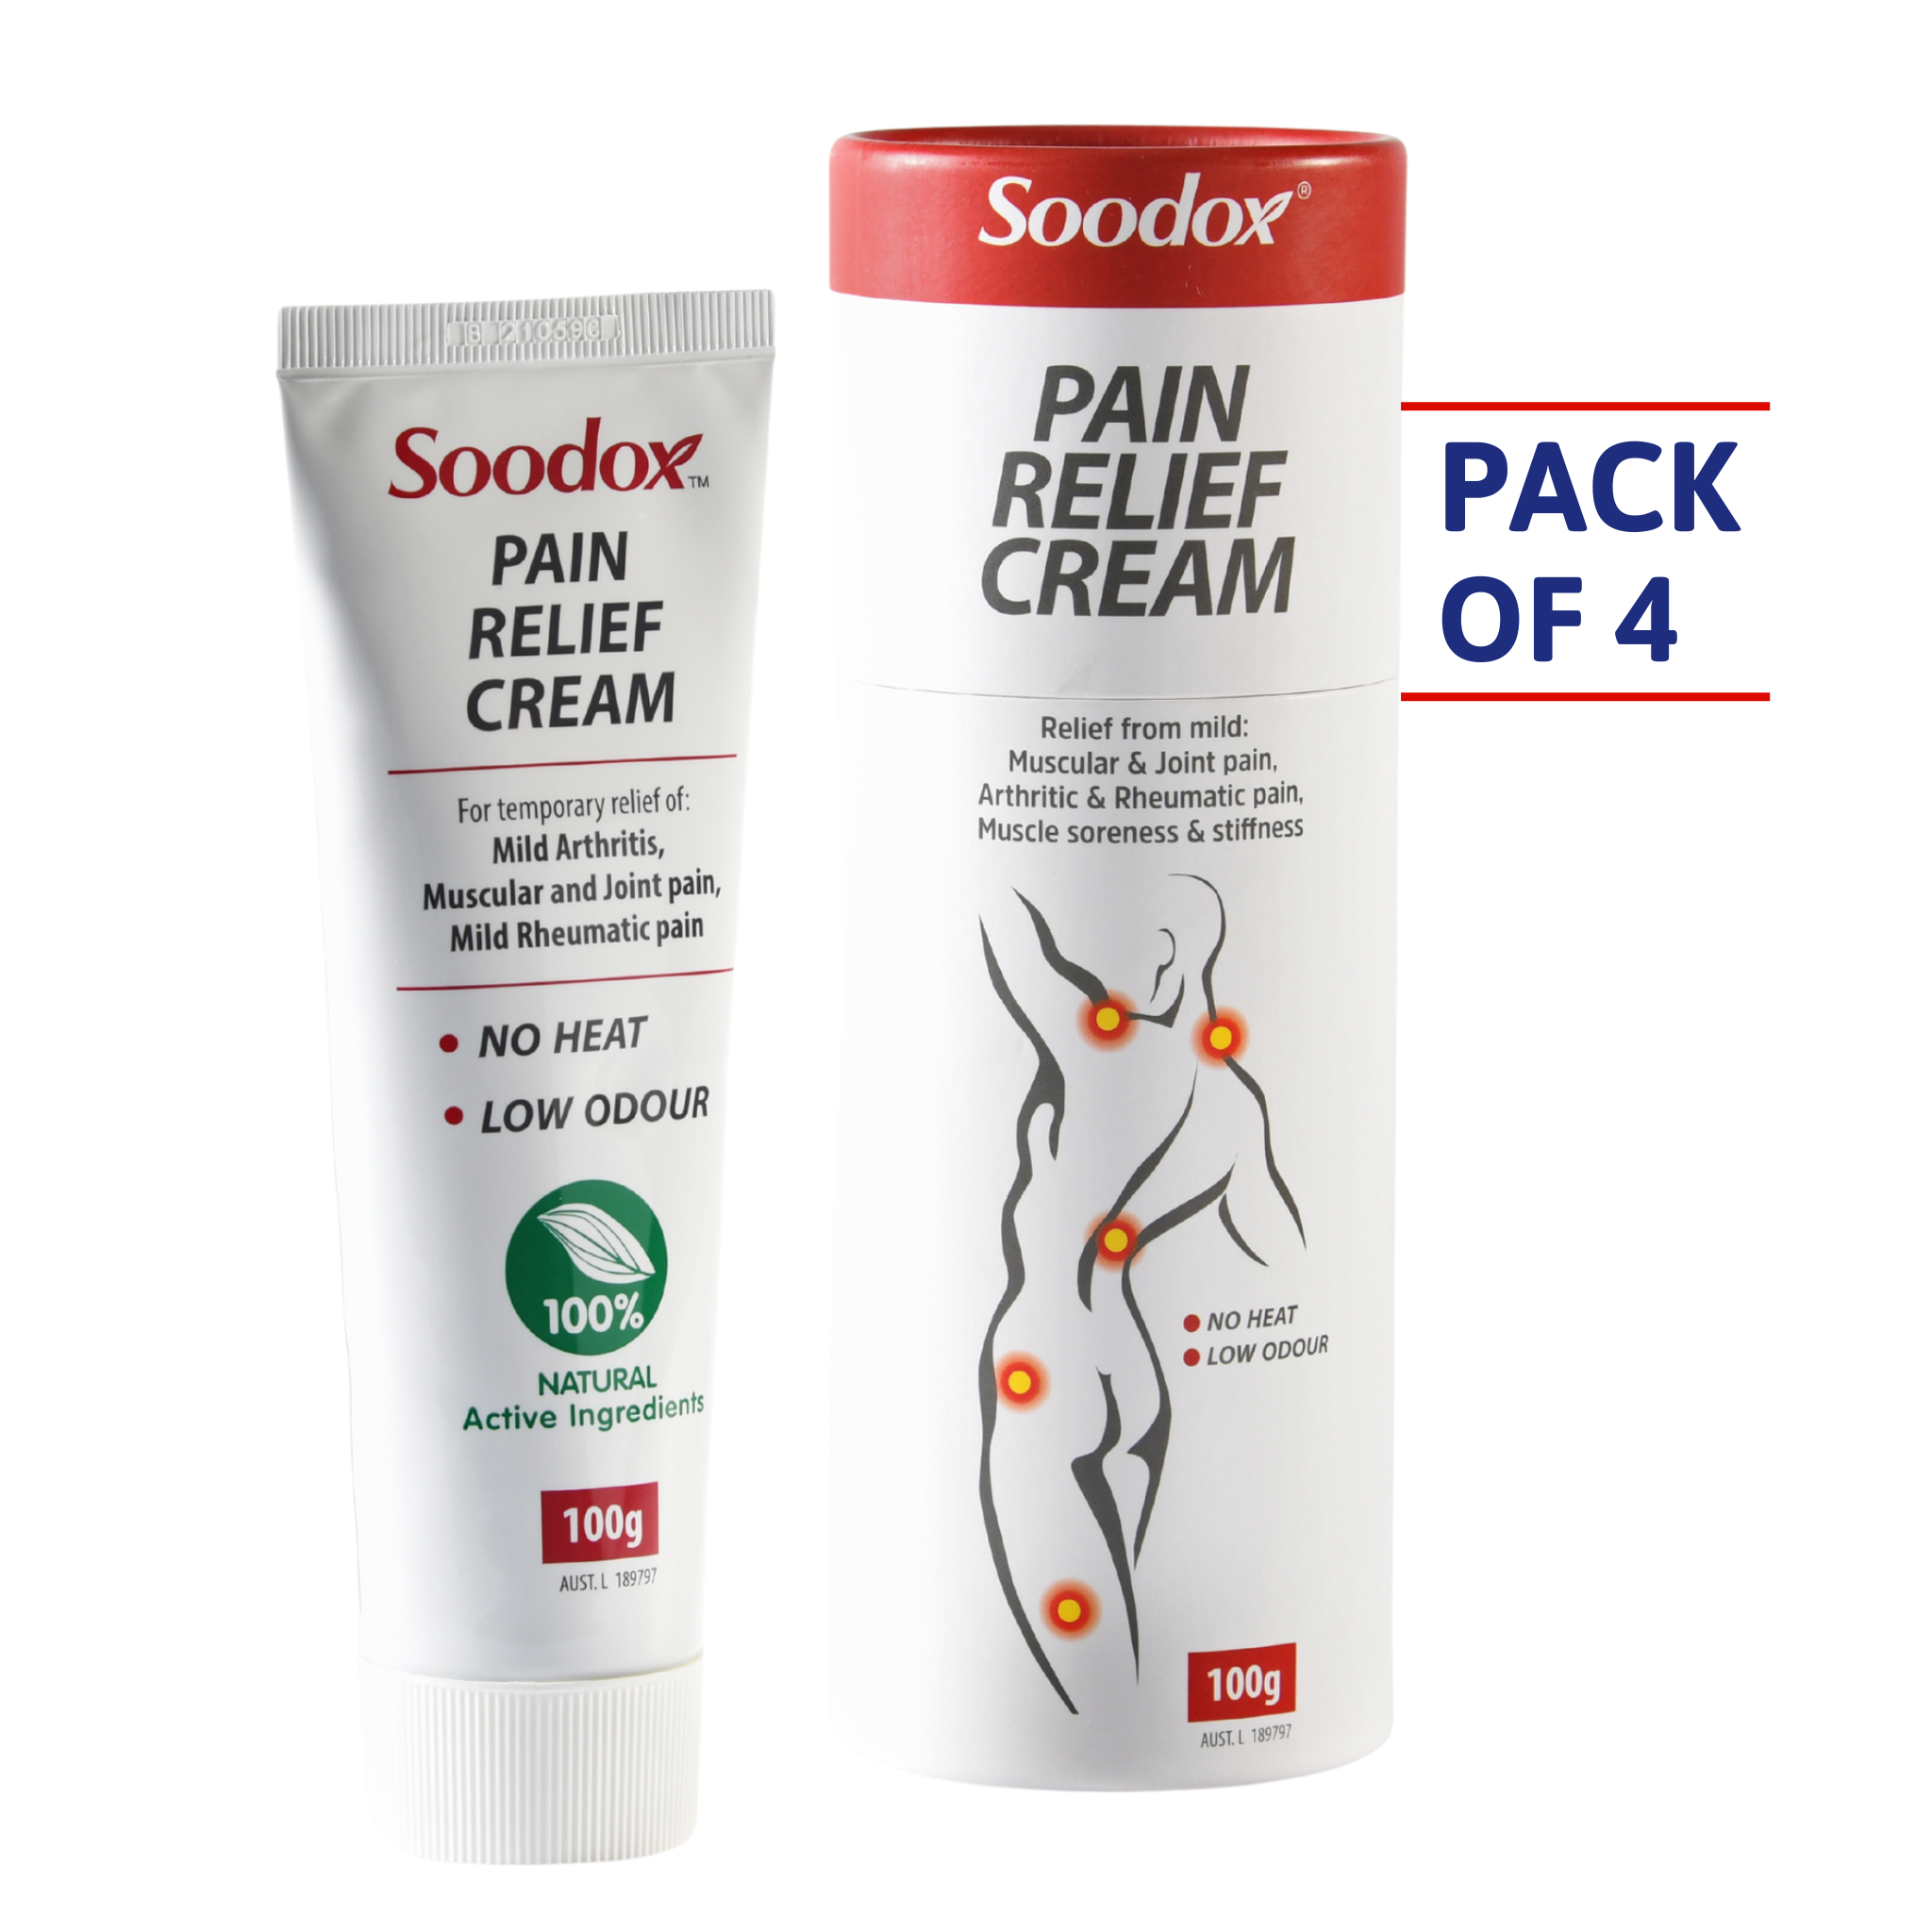 Soodox pain relief cream pack of 4